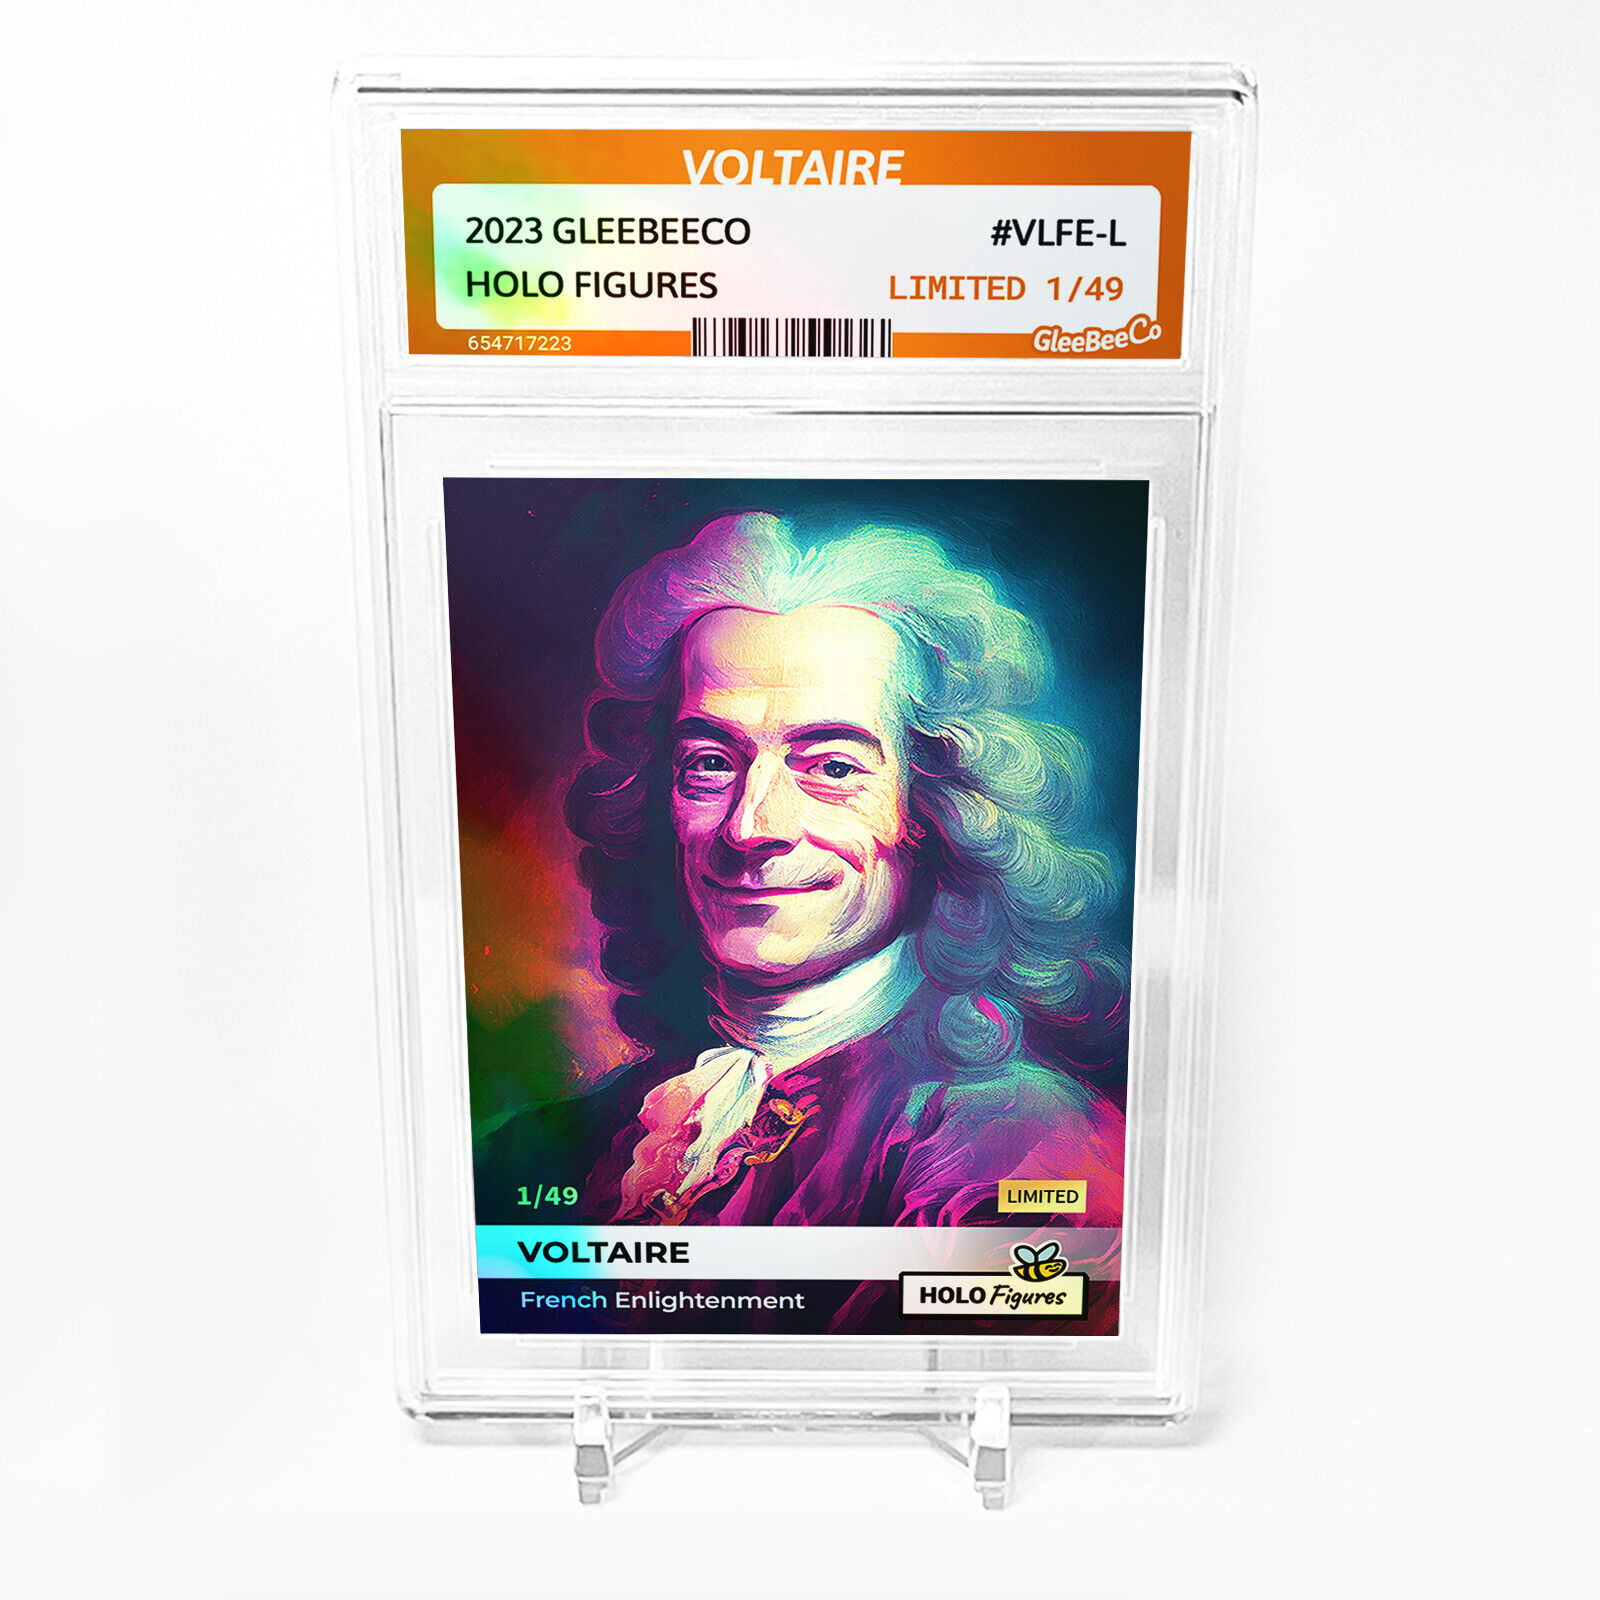 VOLTAIRE Card GleeBeeCo Holo Figures #VLFE-L Limited to Only /49